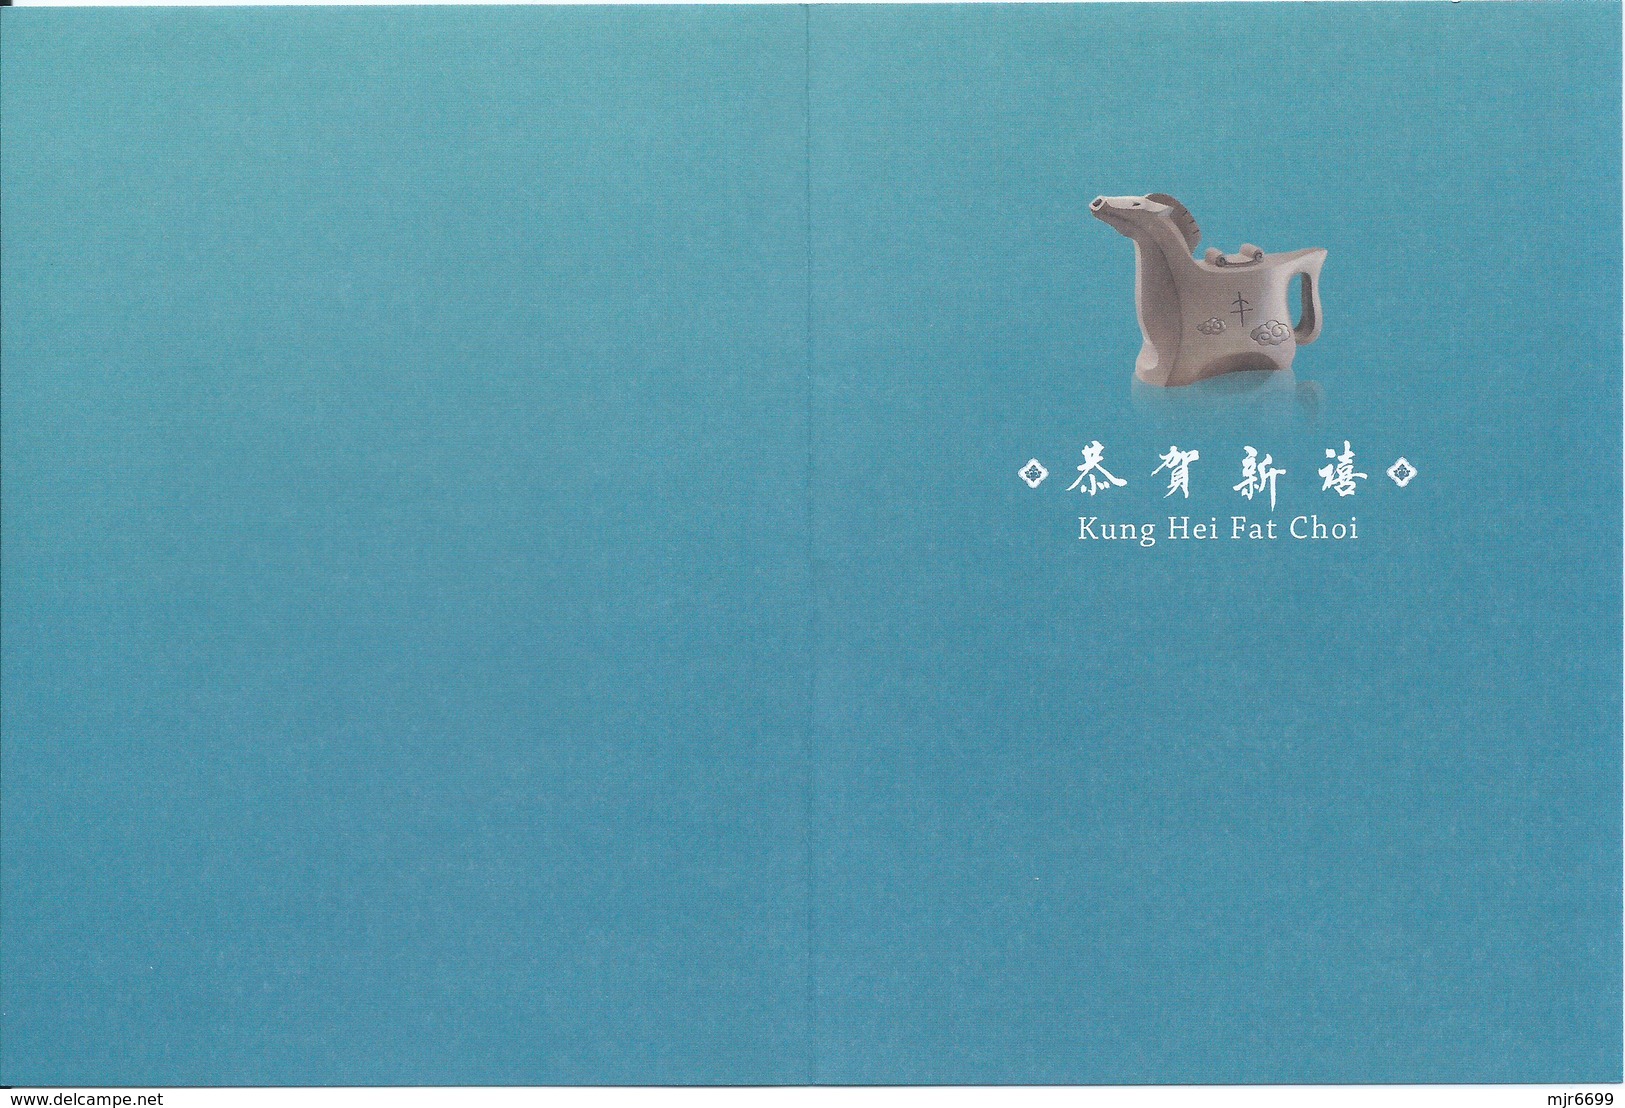 MACAU 2014 LUNAR YEAR OF THE HORSE GREETING CARD & POSTAGE PAID COVER - Postal Stationery